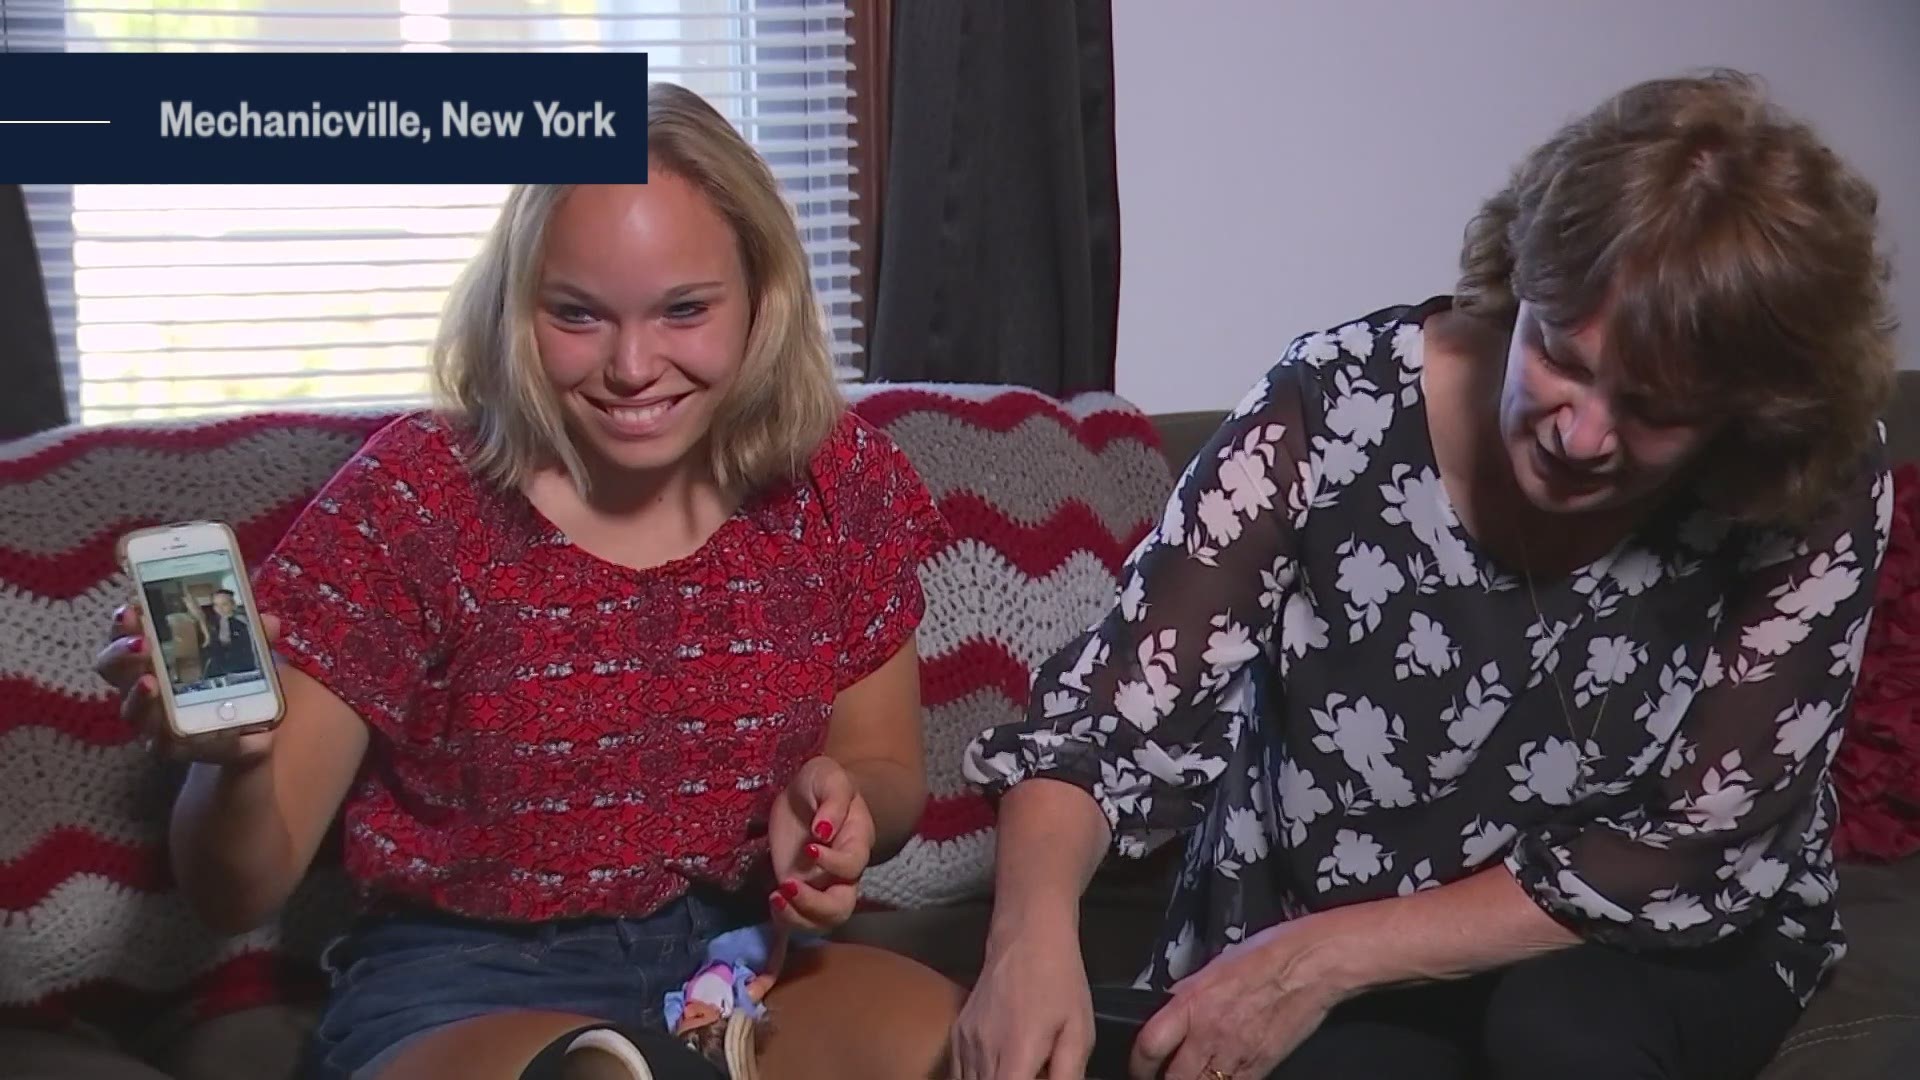 A New York teenager collects and donates Barbie with prosthetic to young amputees. WNYT's Emily Burkhard reports.